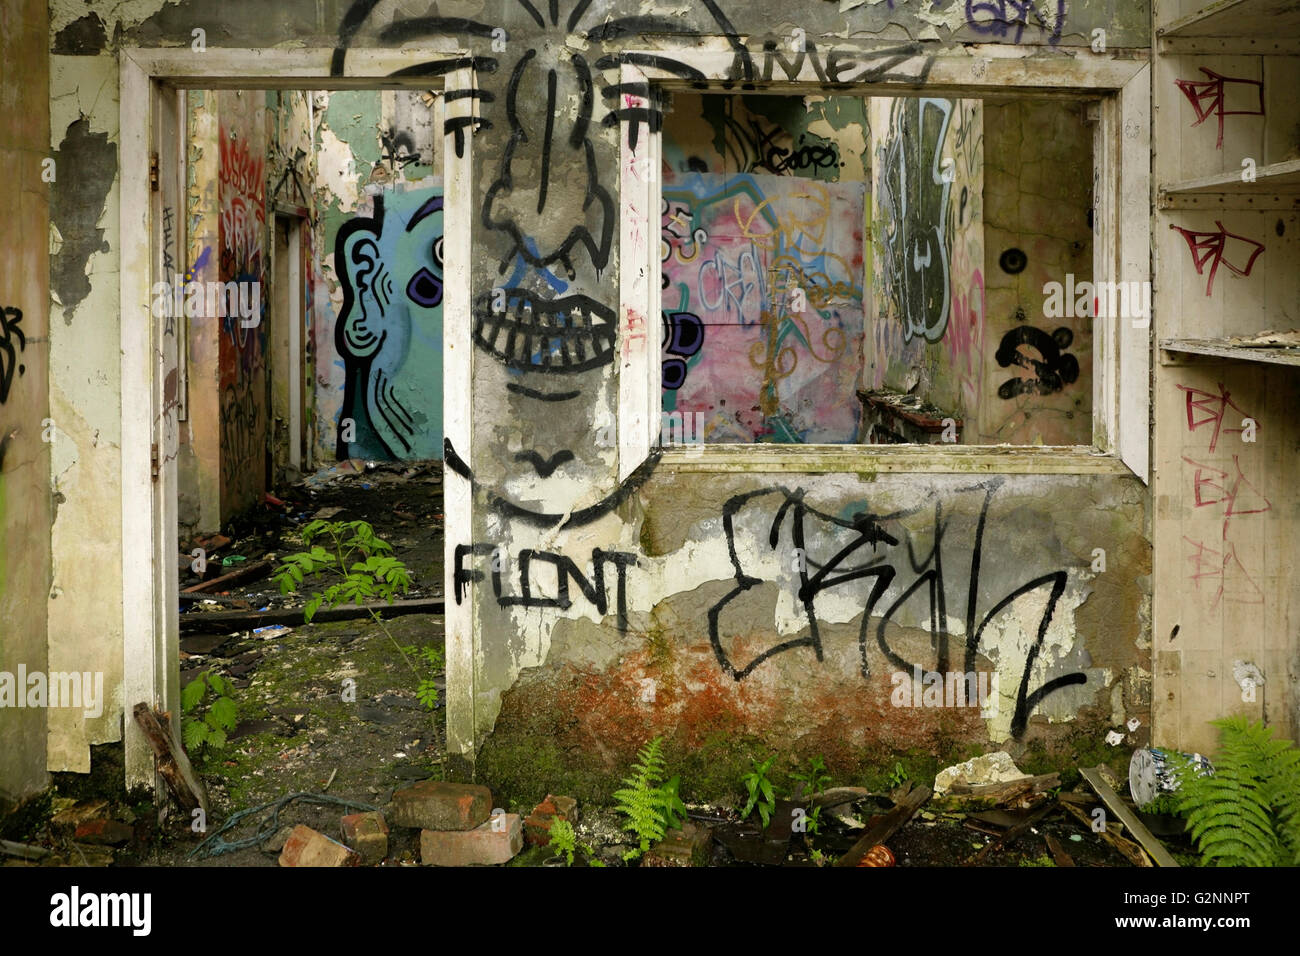 Graffiti And Vandalism In Abandoned Derelict Building Stock Photo Alamy